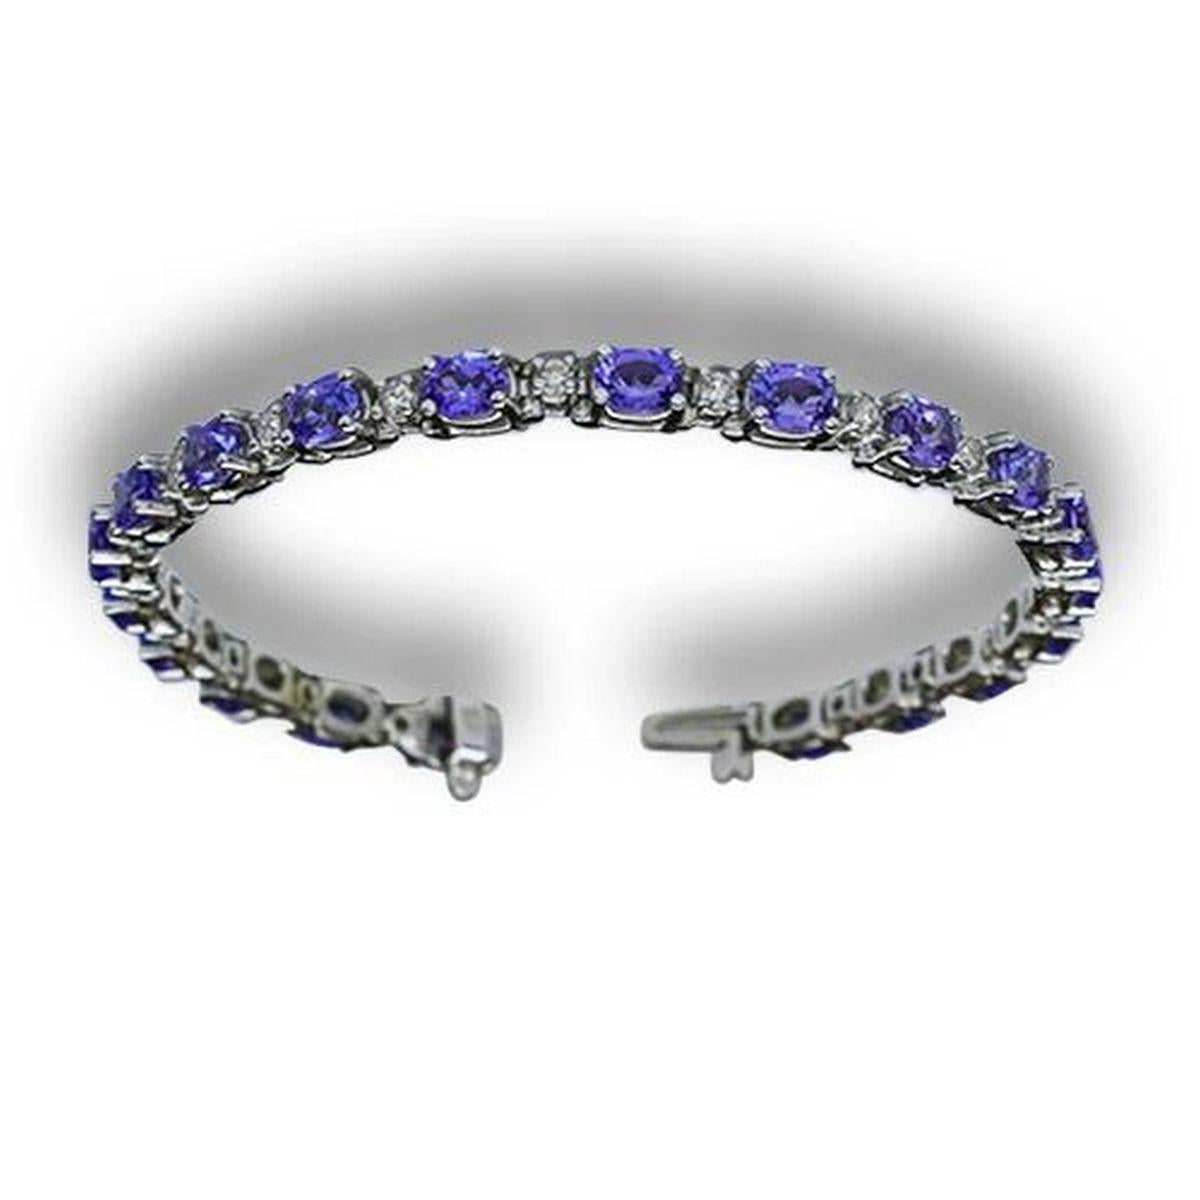 Simply Beautiful! Elegant and finely detailed Vintage Oscar Worthy Tanzanite and Diamond Gold Bracelet. Hand set with 20 Oval Blue/Violet Tanzanite I/F High Quality Gemstones, approx. 9.60tcw. Inter-spaced with Round Brilliant-cut Diamonds, approx.